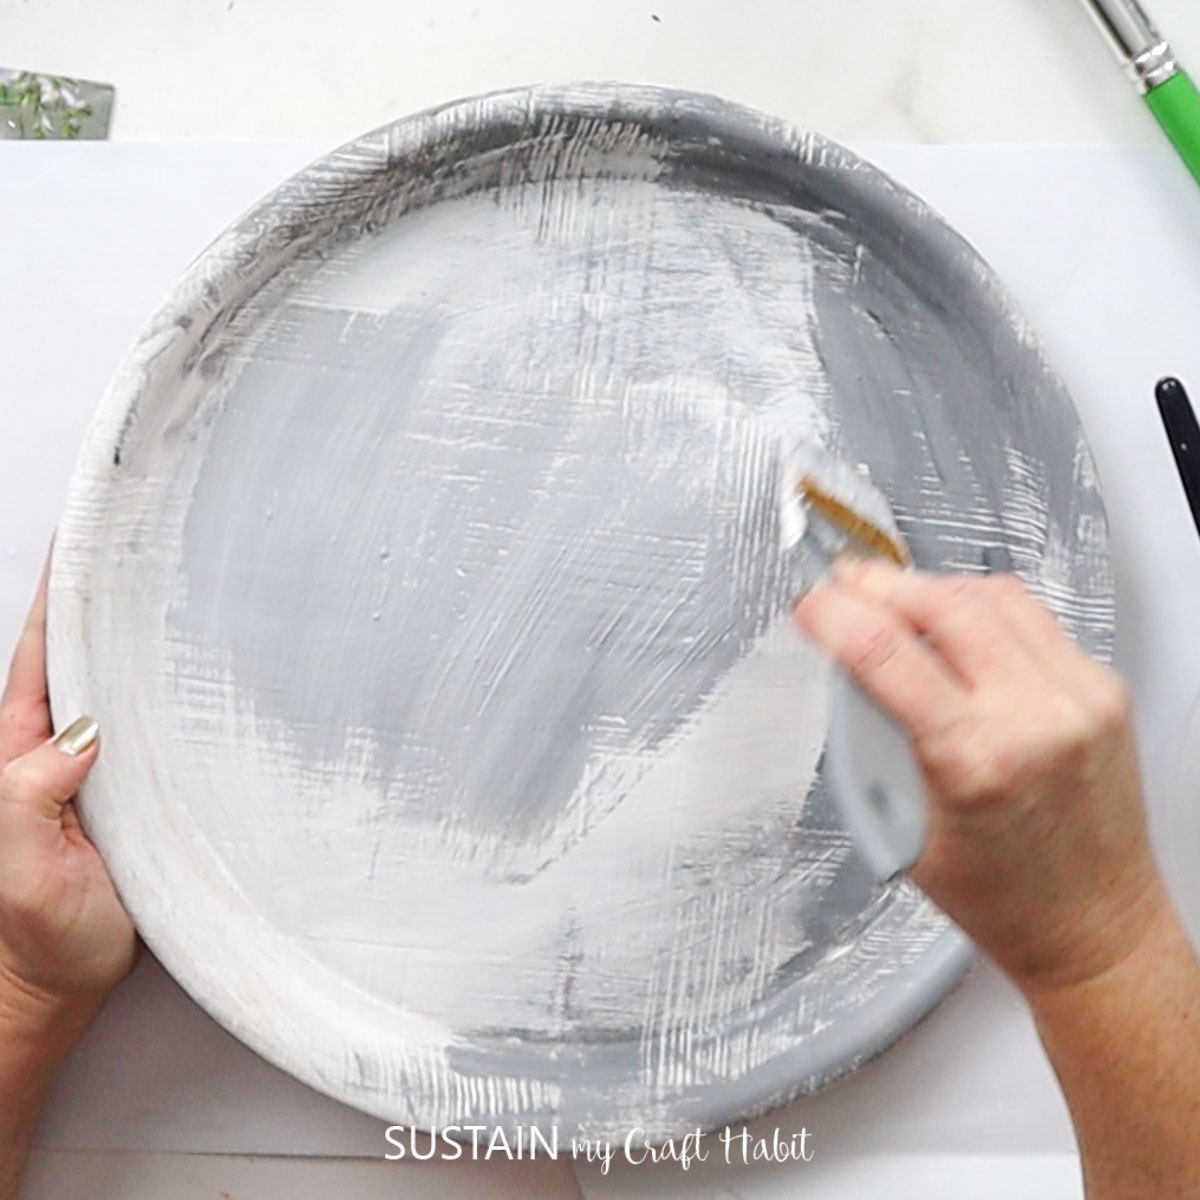 Painting over white paint with grey paint.